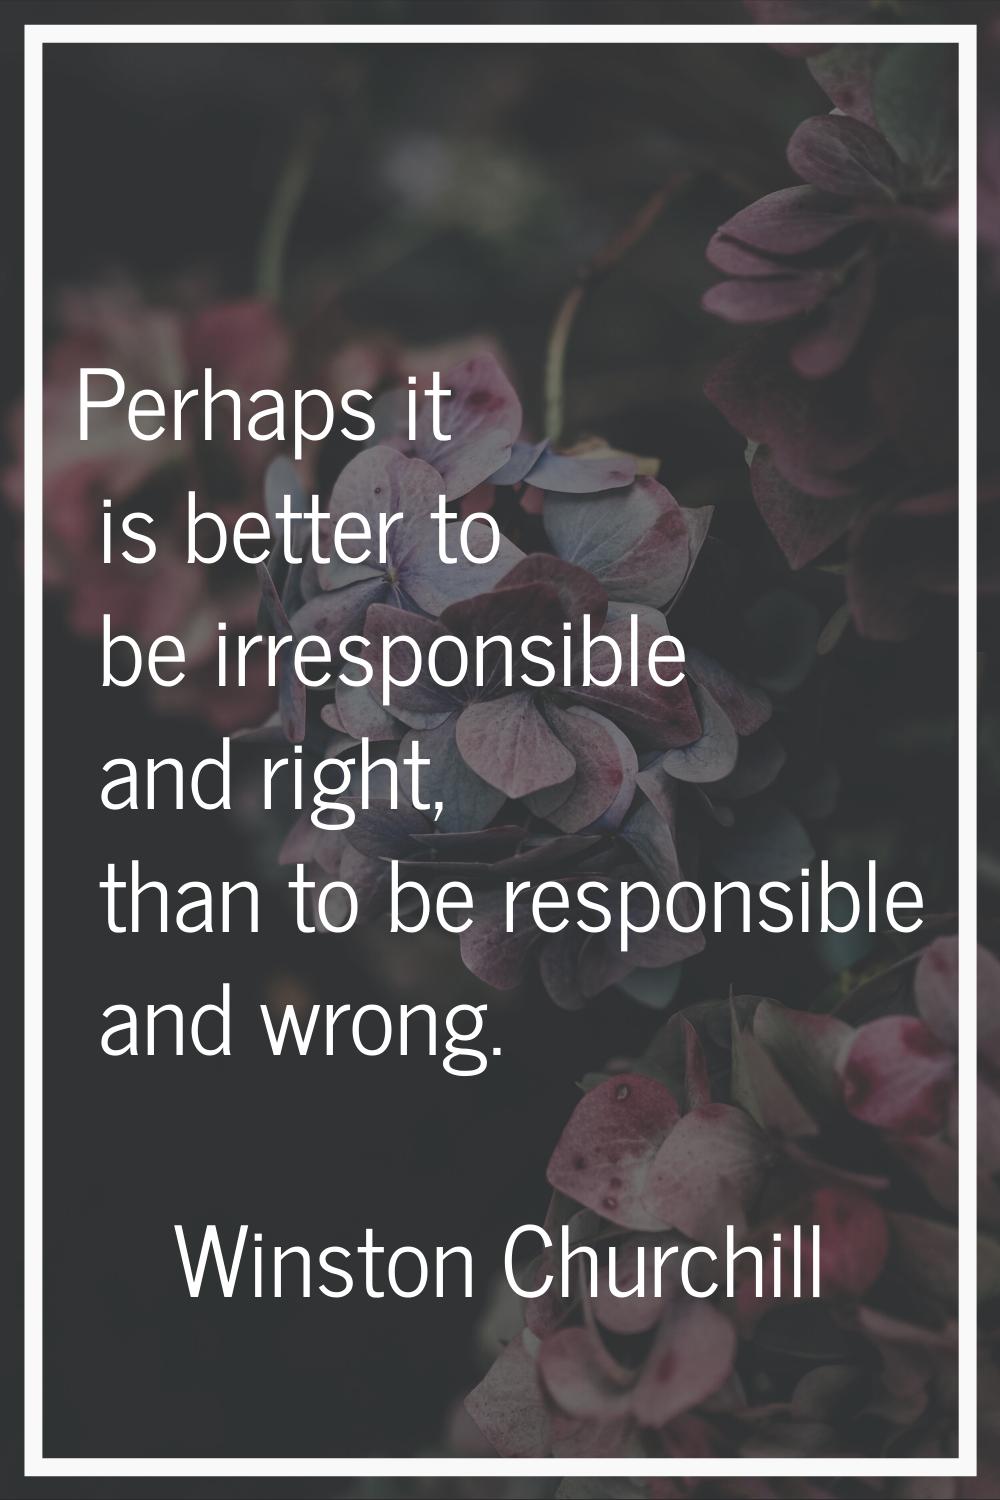 Perhaps it is better to be irresponsible and right, than to be responsible and wrong.